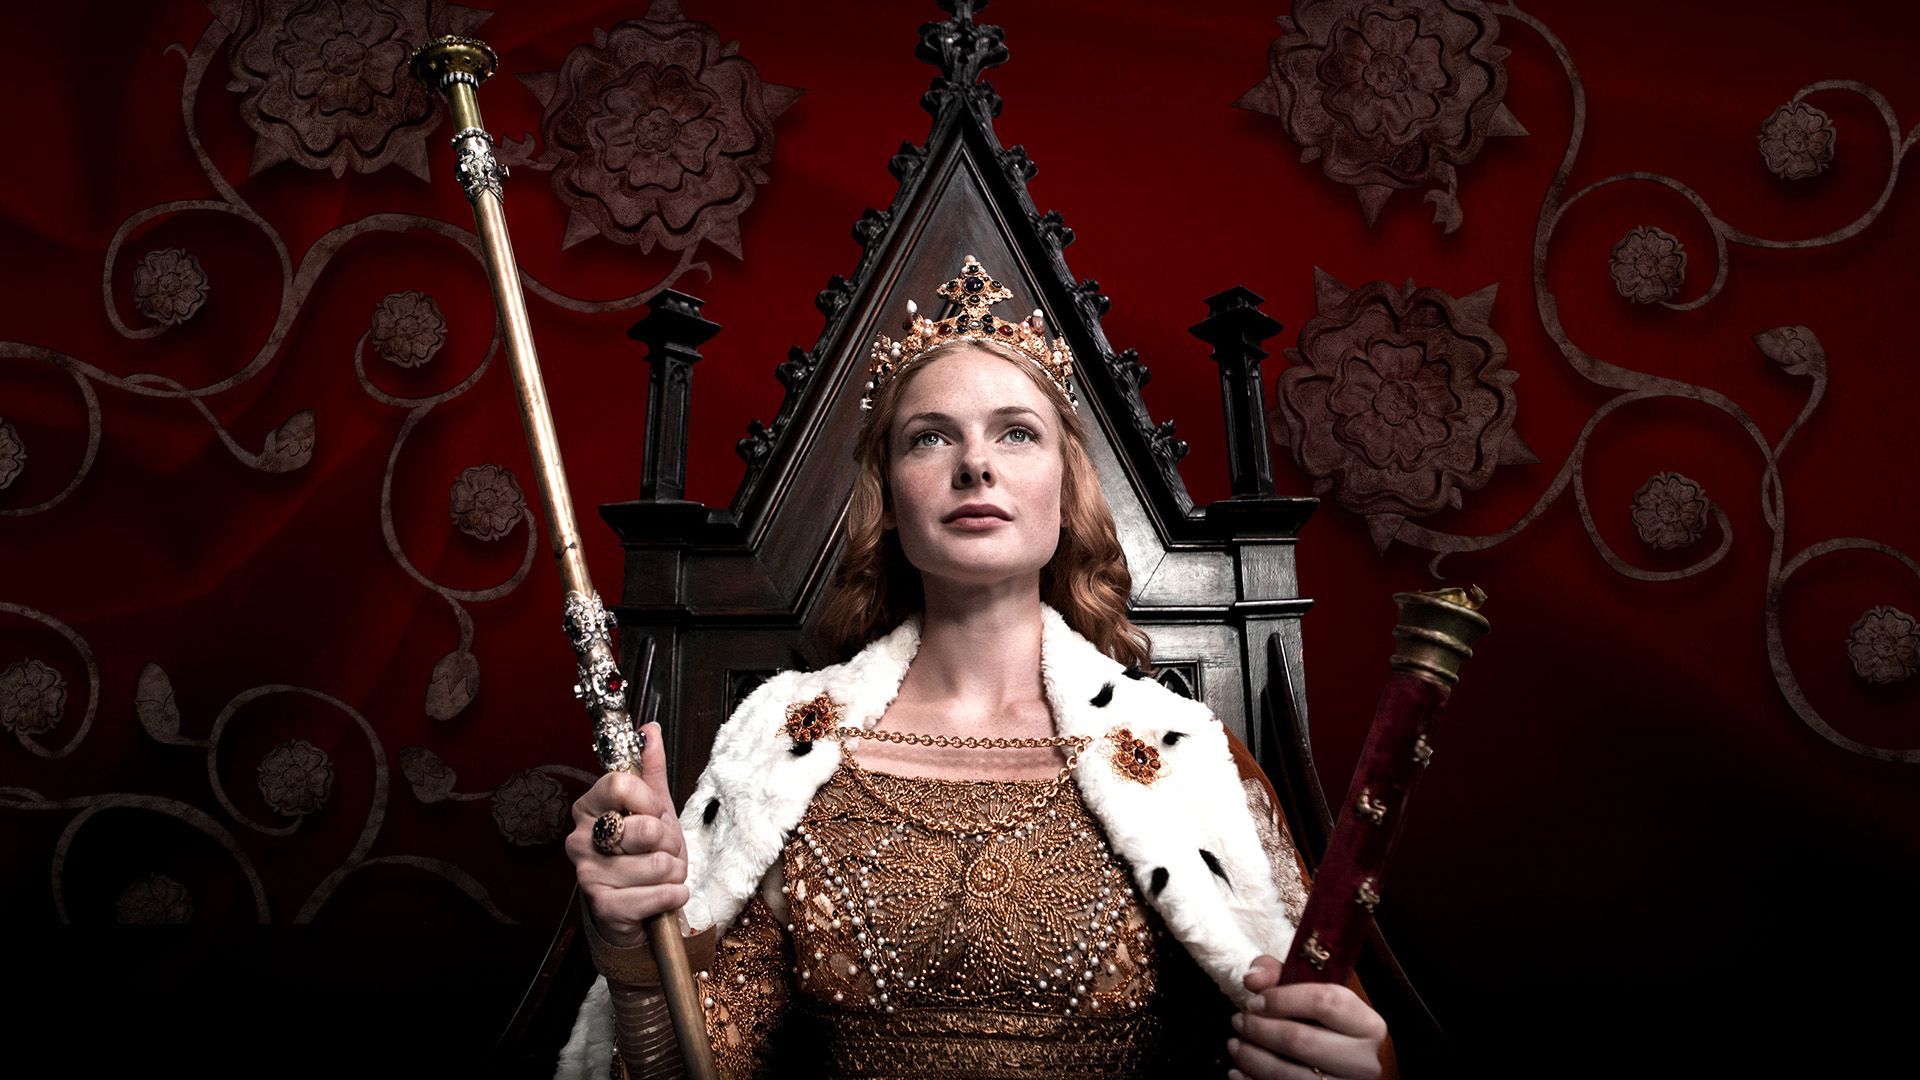 The White Queen background